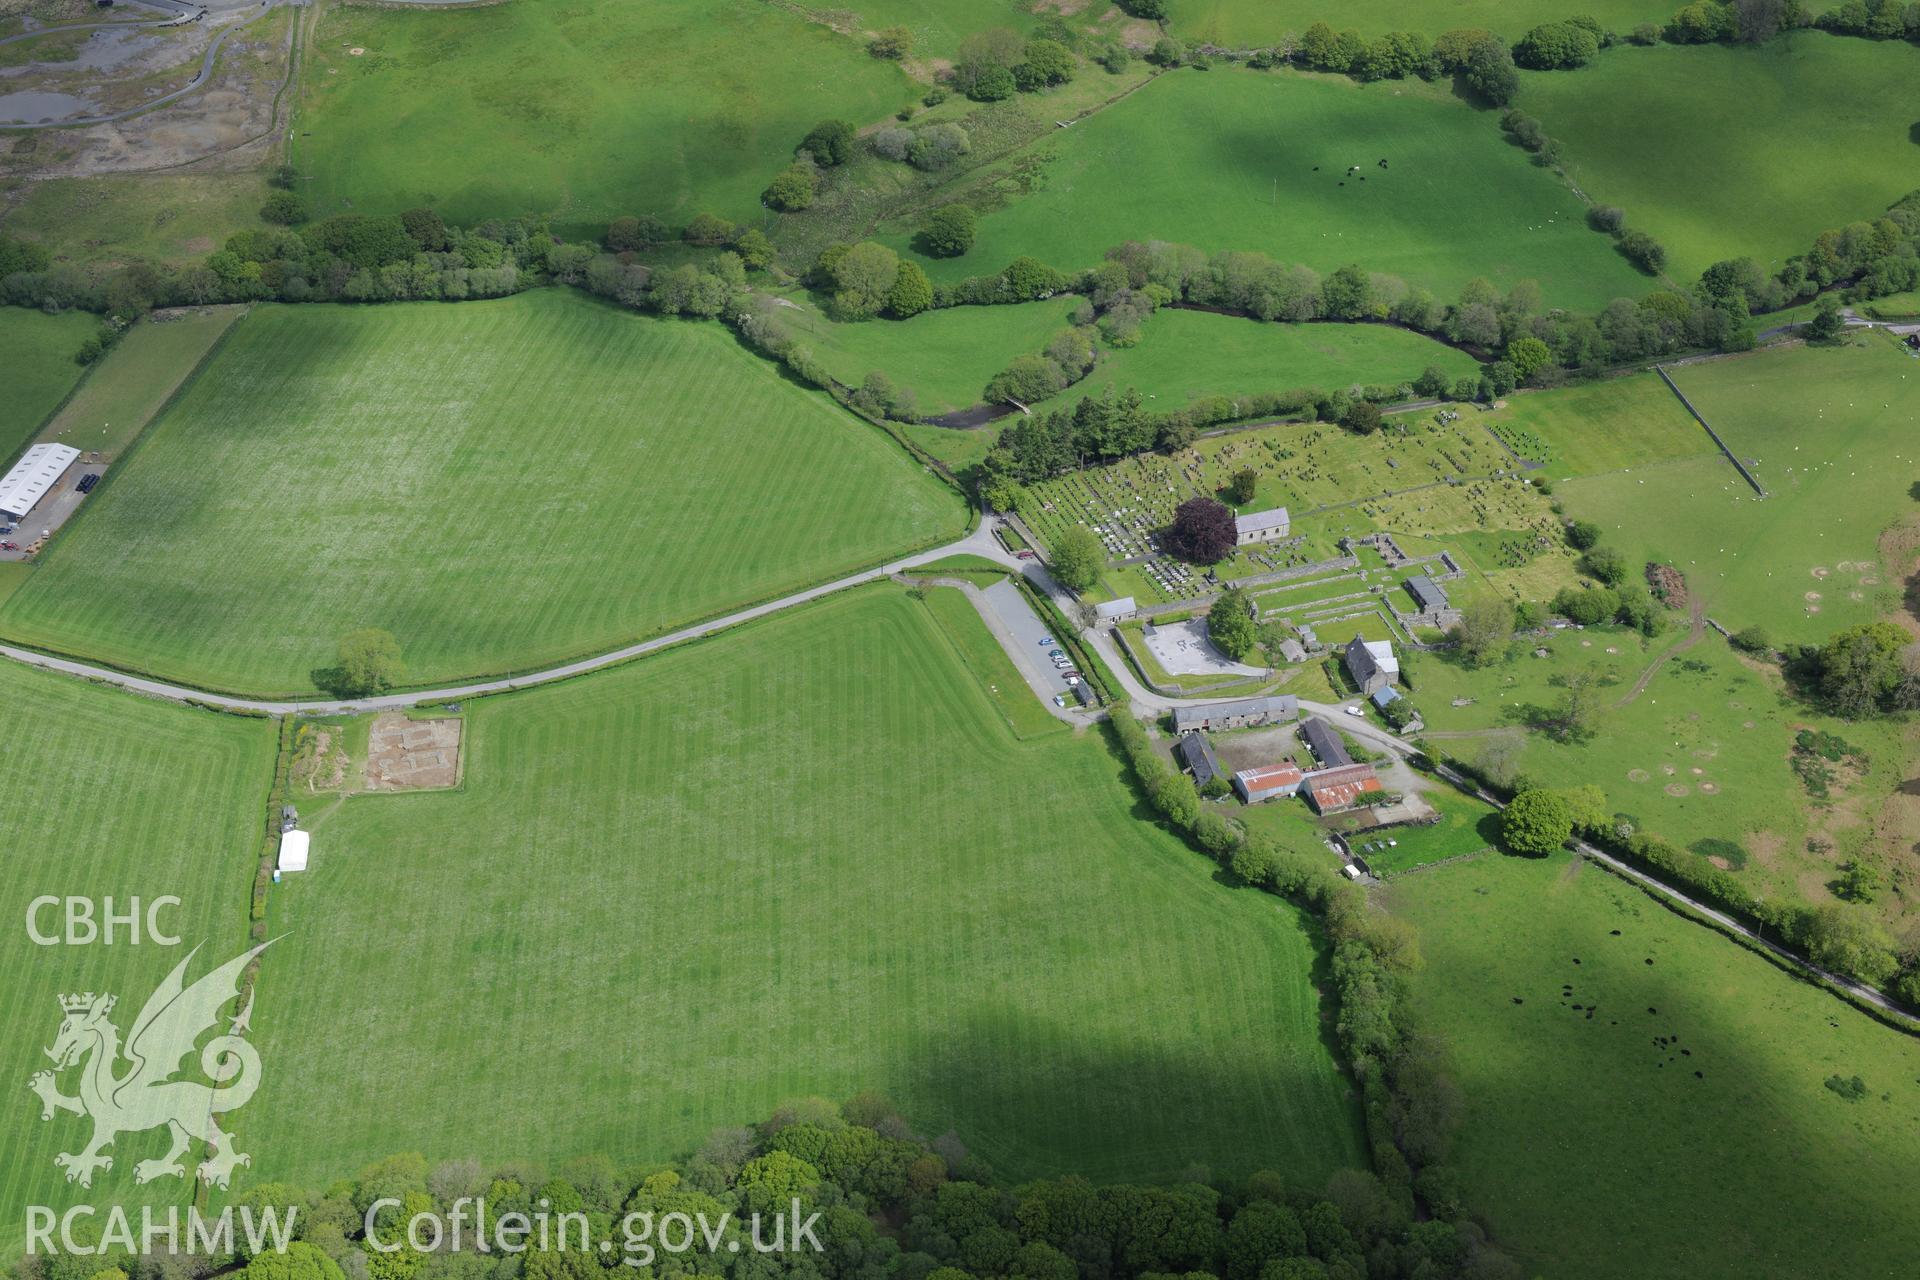 Strata Florida Abbey, Farmhouse, Gatehouse and St. Mary's Church. Oblique aerial photograph taken during the Royal Commission's programme of archaeological aerial reconnaissance by Toby Driver on 3rd June 2015.